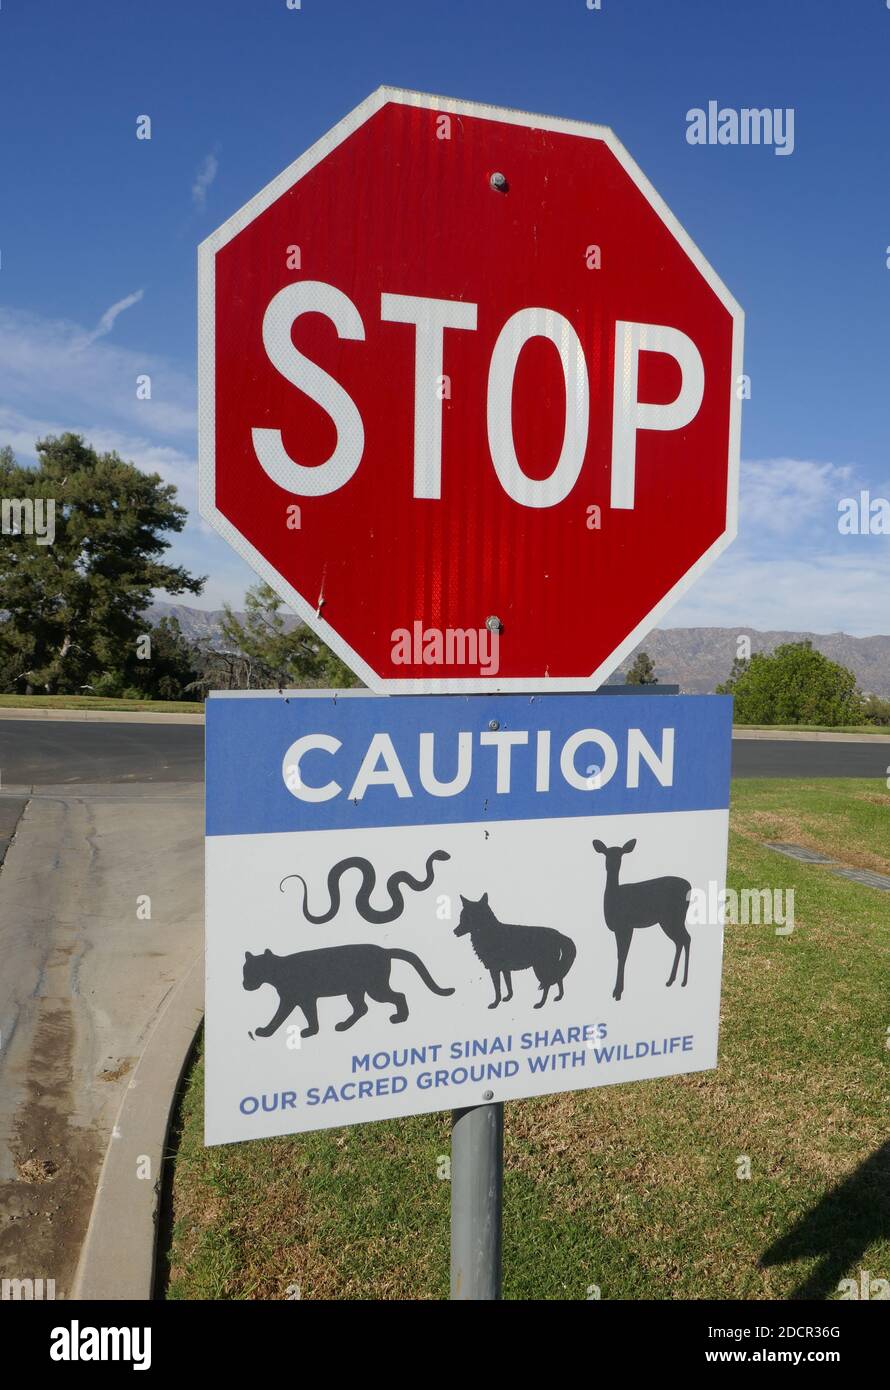 Los Angeles, California, USA 17th November 2020 A general view of atmosphere of Caution Wildlife Sign at Mount Sinai Cemetery Hollywood Hills on November 17, 2020 in Los Angeles, California, USA. Photo by Barry King/Alamy Stock Photo Stock Photo